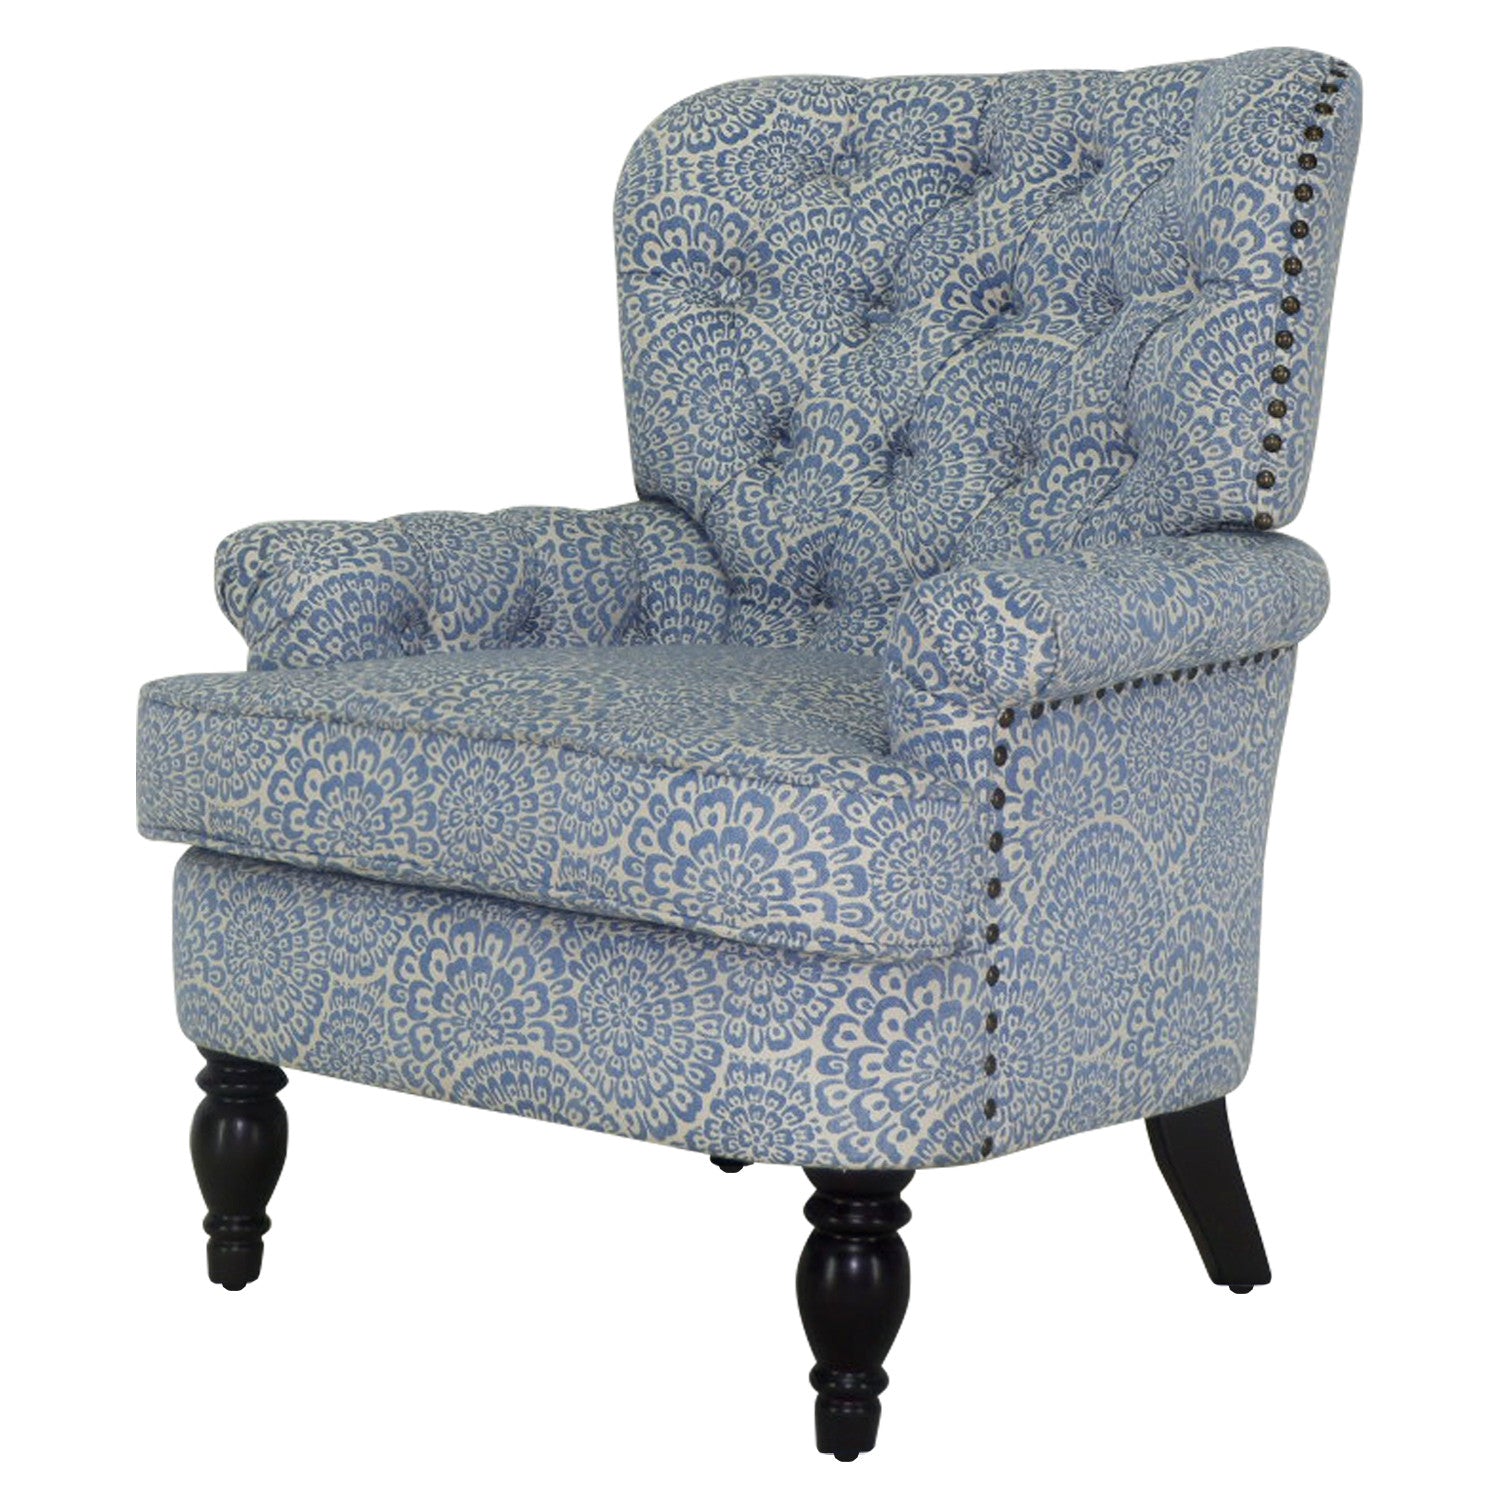 33" Periwinkle Cream And Brown Polyester Blend Floral Wingback Chair